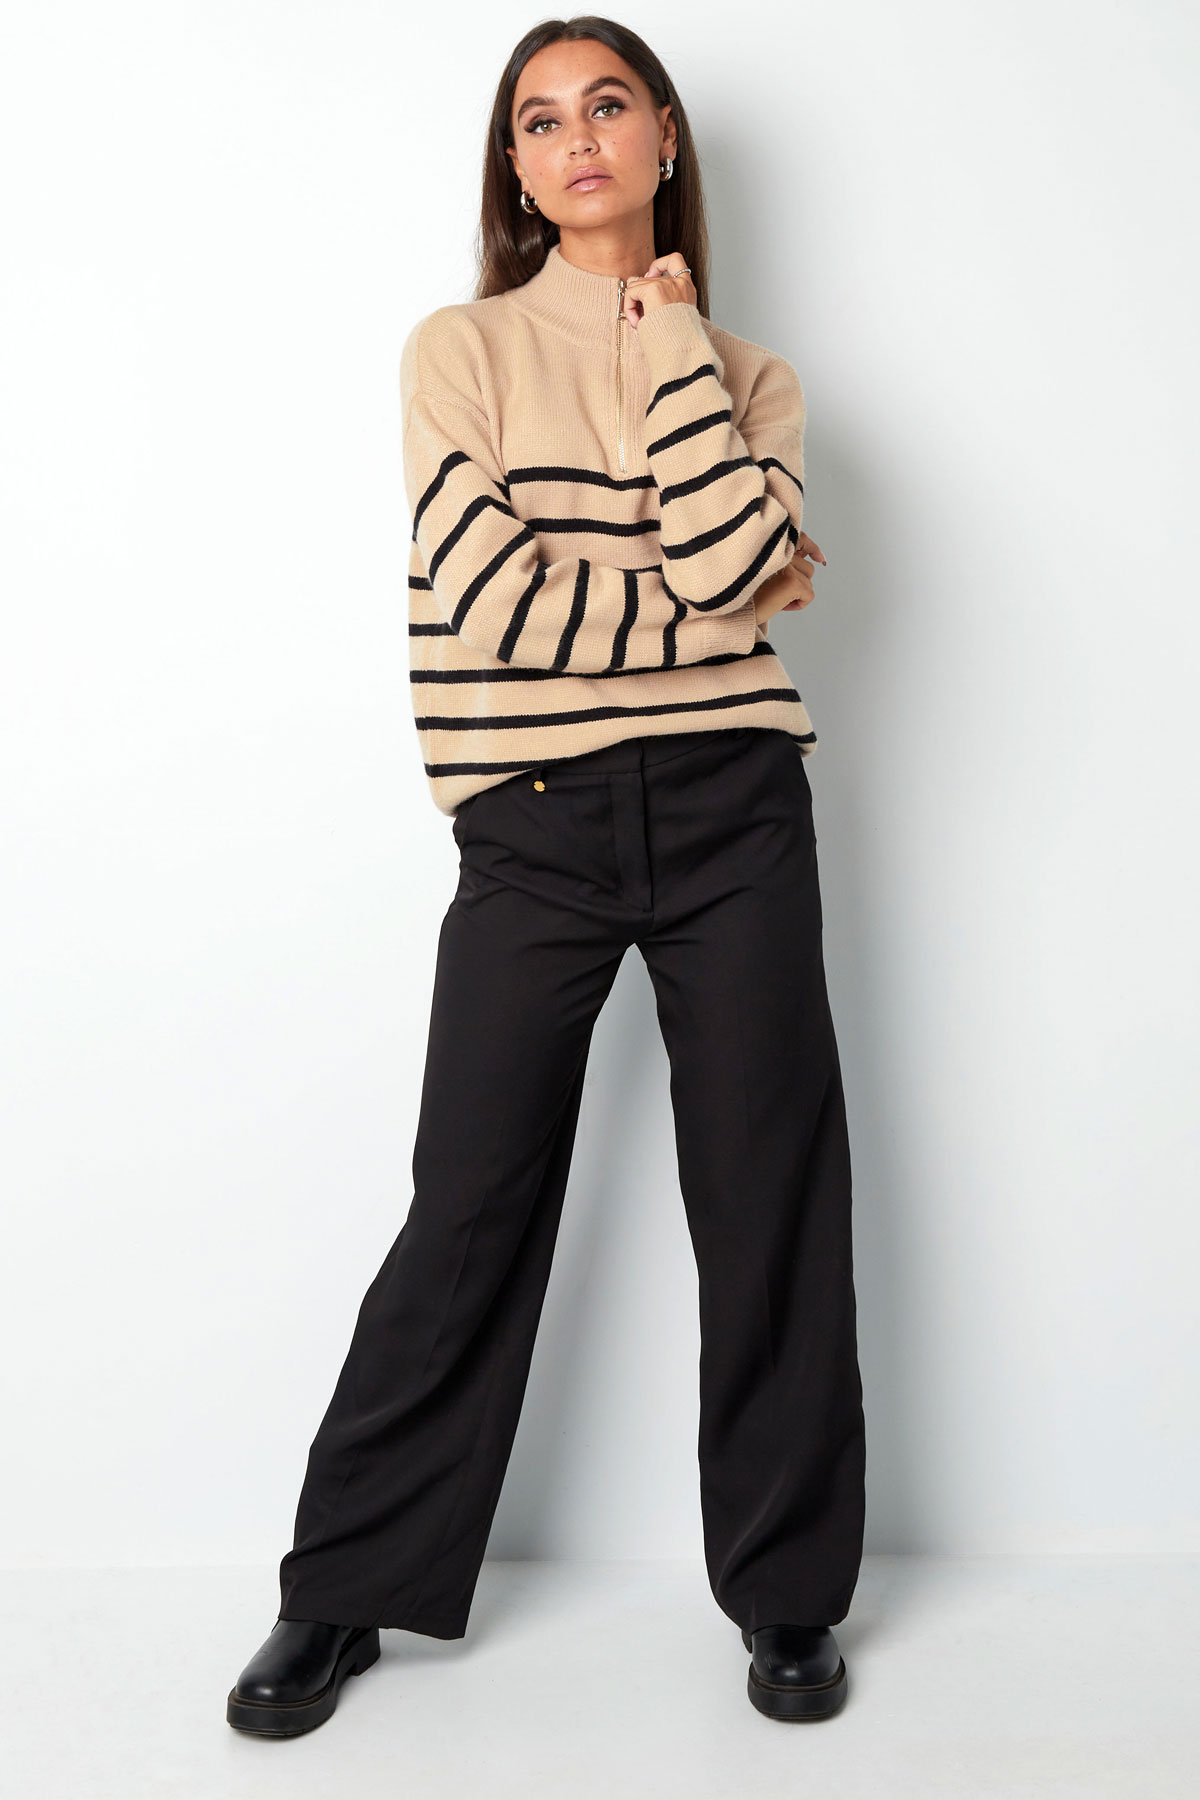 Knitted sweater stripes with zipper - black beige - SM Picture8